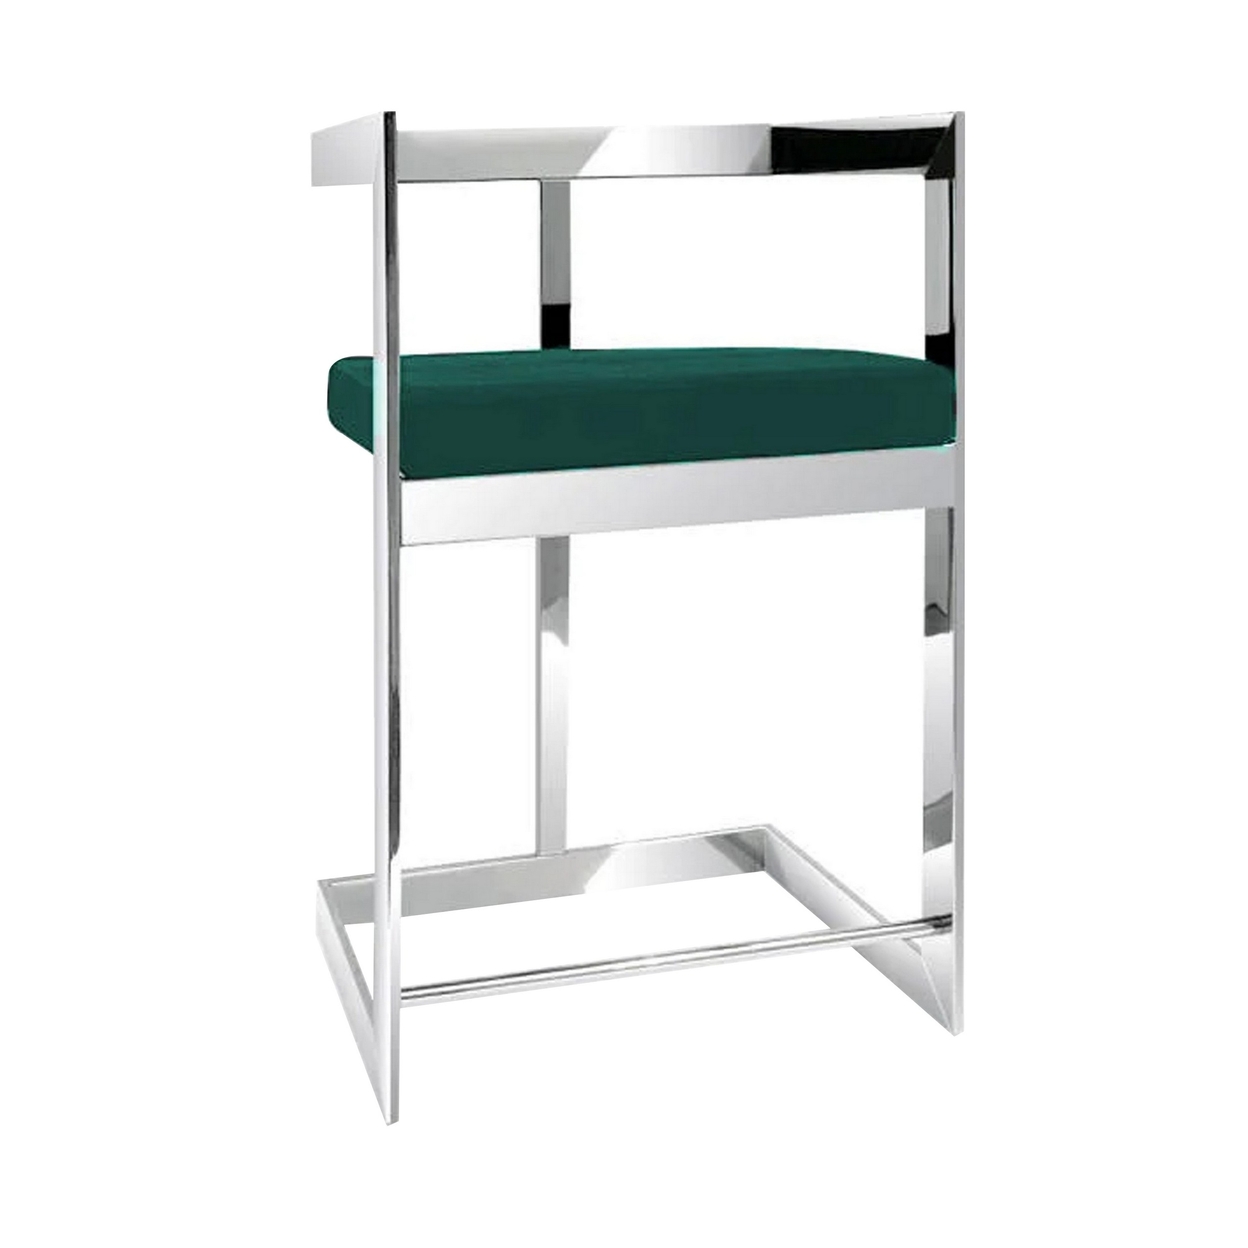 Dok 26 Inch Counter Height Stool, Green, Cantilever, Silver Stainless Steel- Saltoro Sherpi